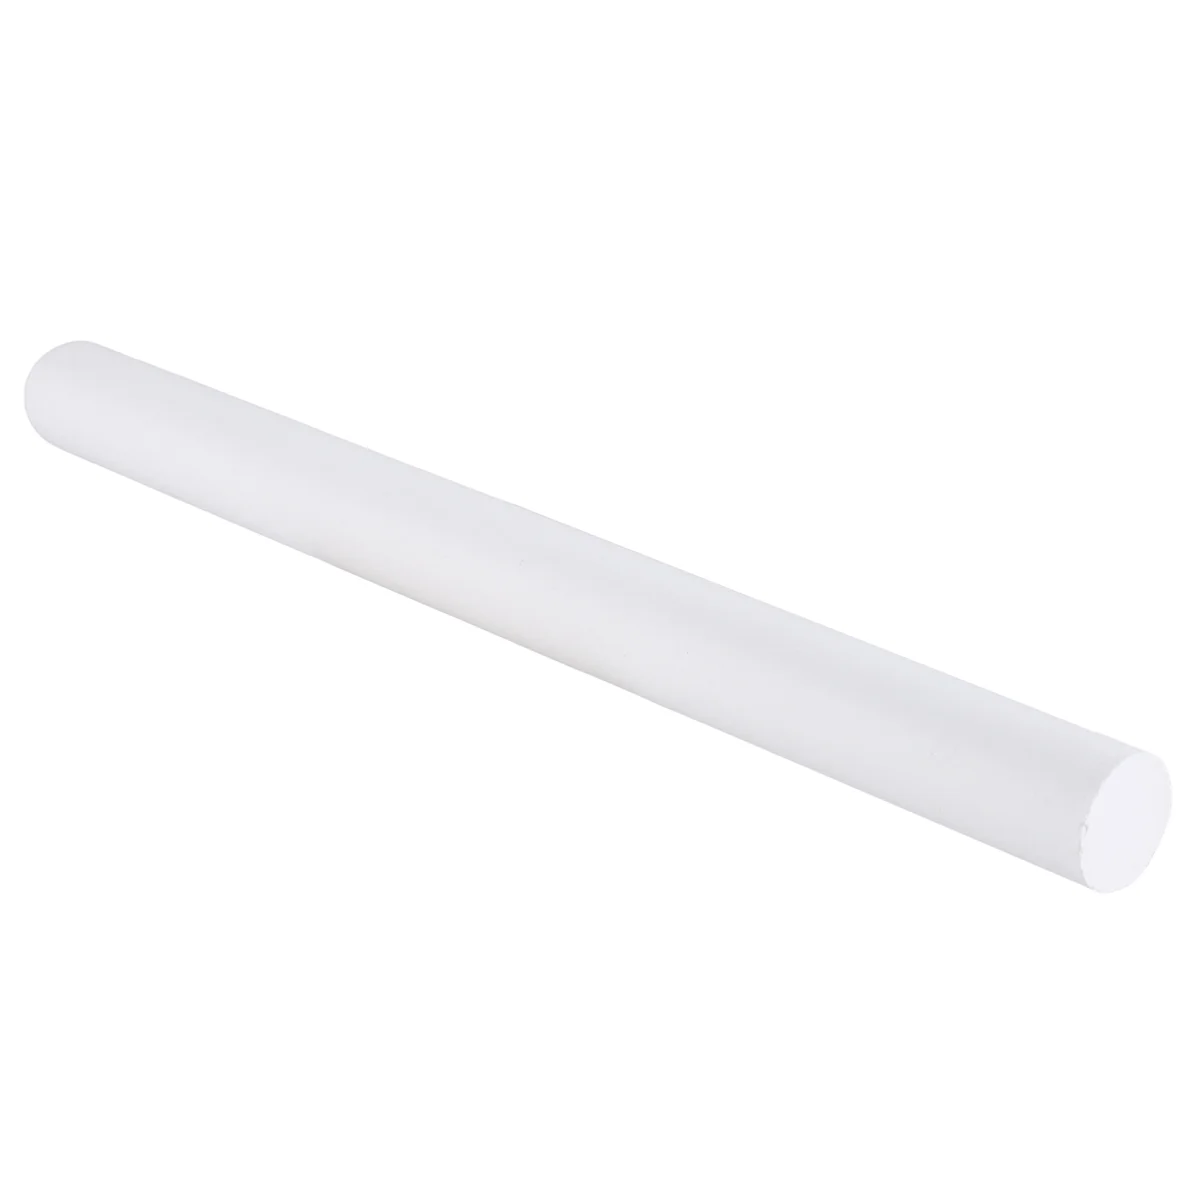 

4Pc Drying Rod Stick Diatomite Moisture Absorbing Stick Clean Water Absorption Rod Diatomite Earth Desiccant for Laundry